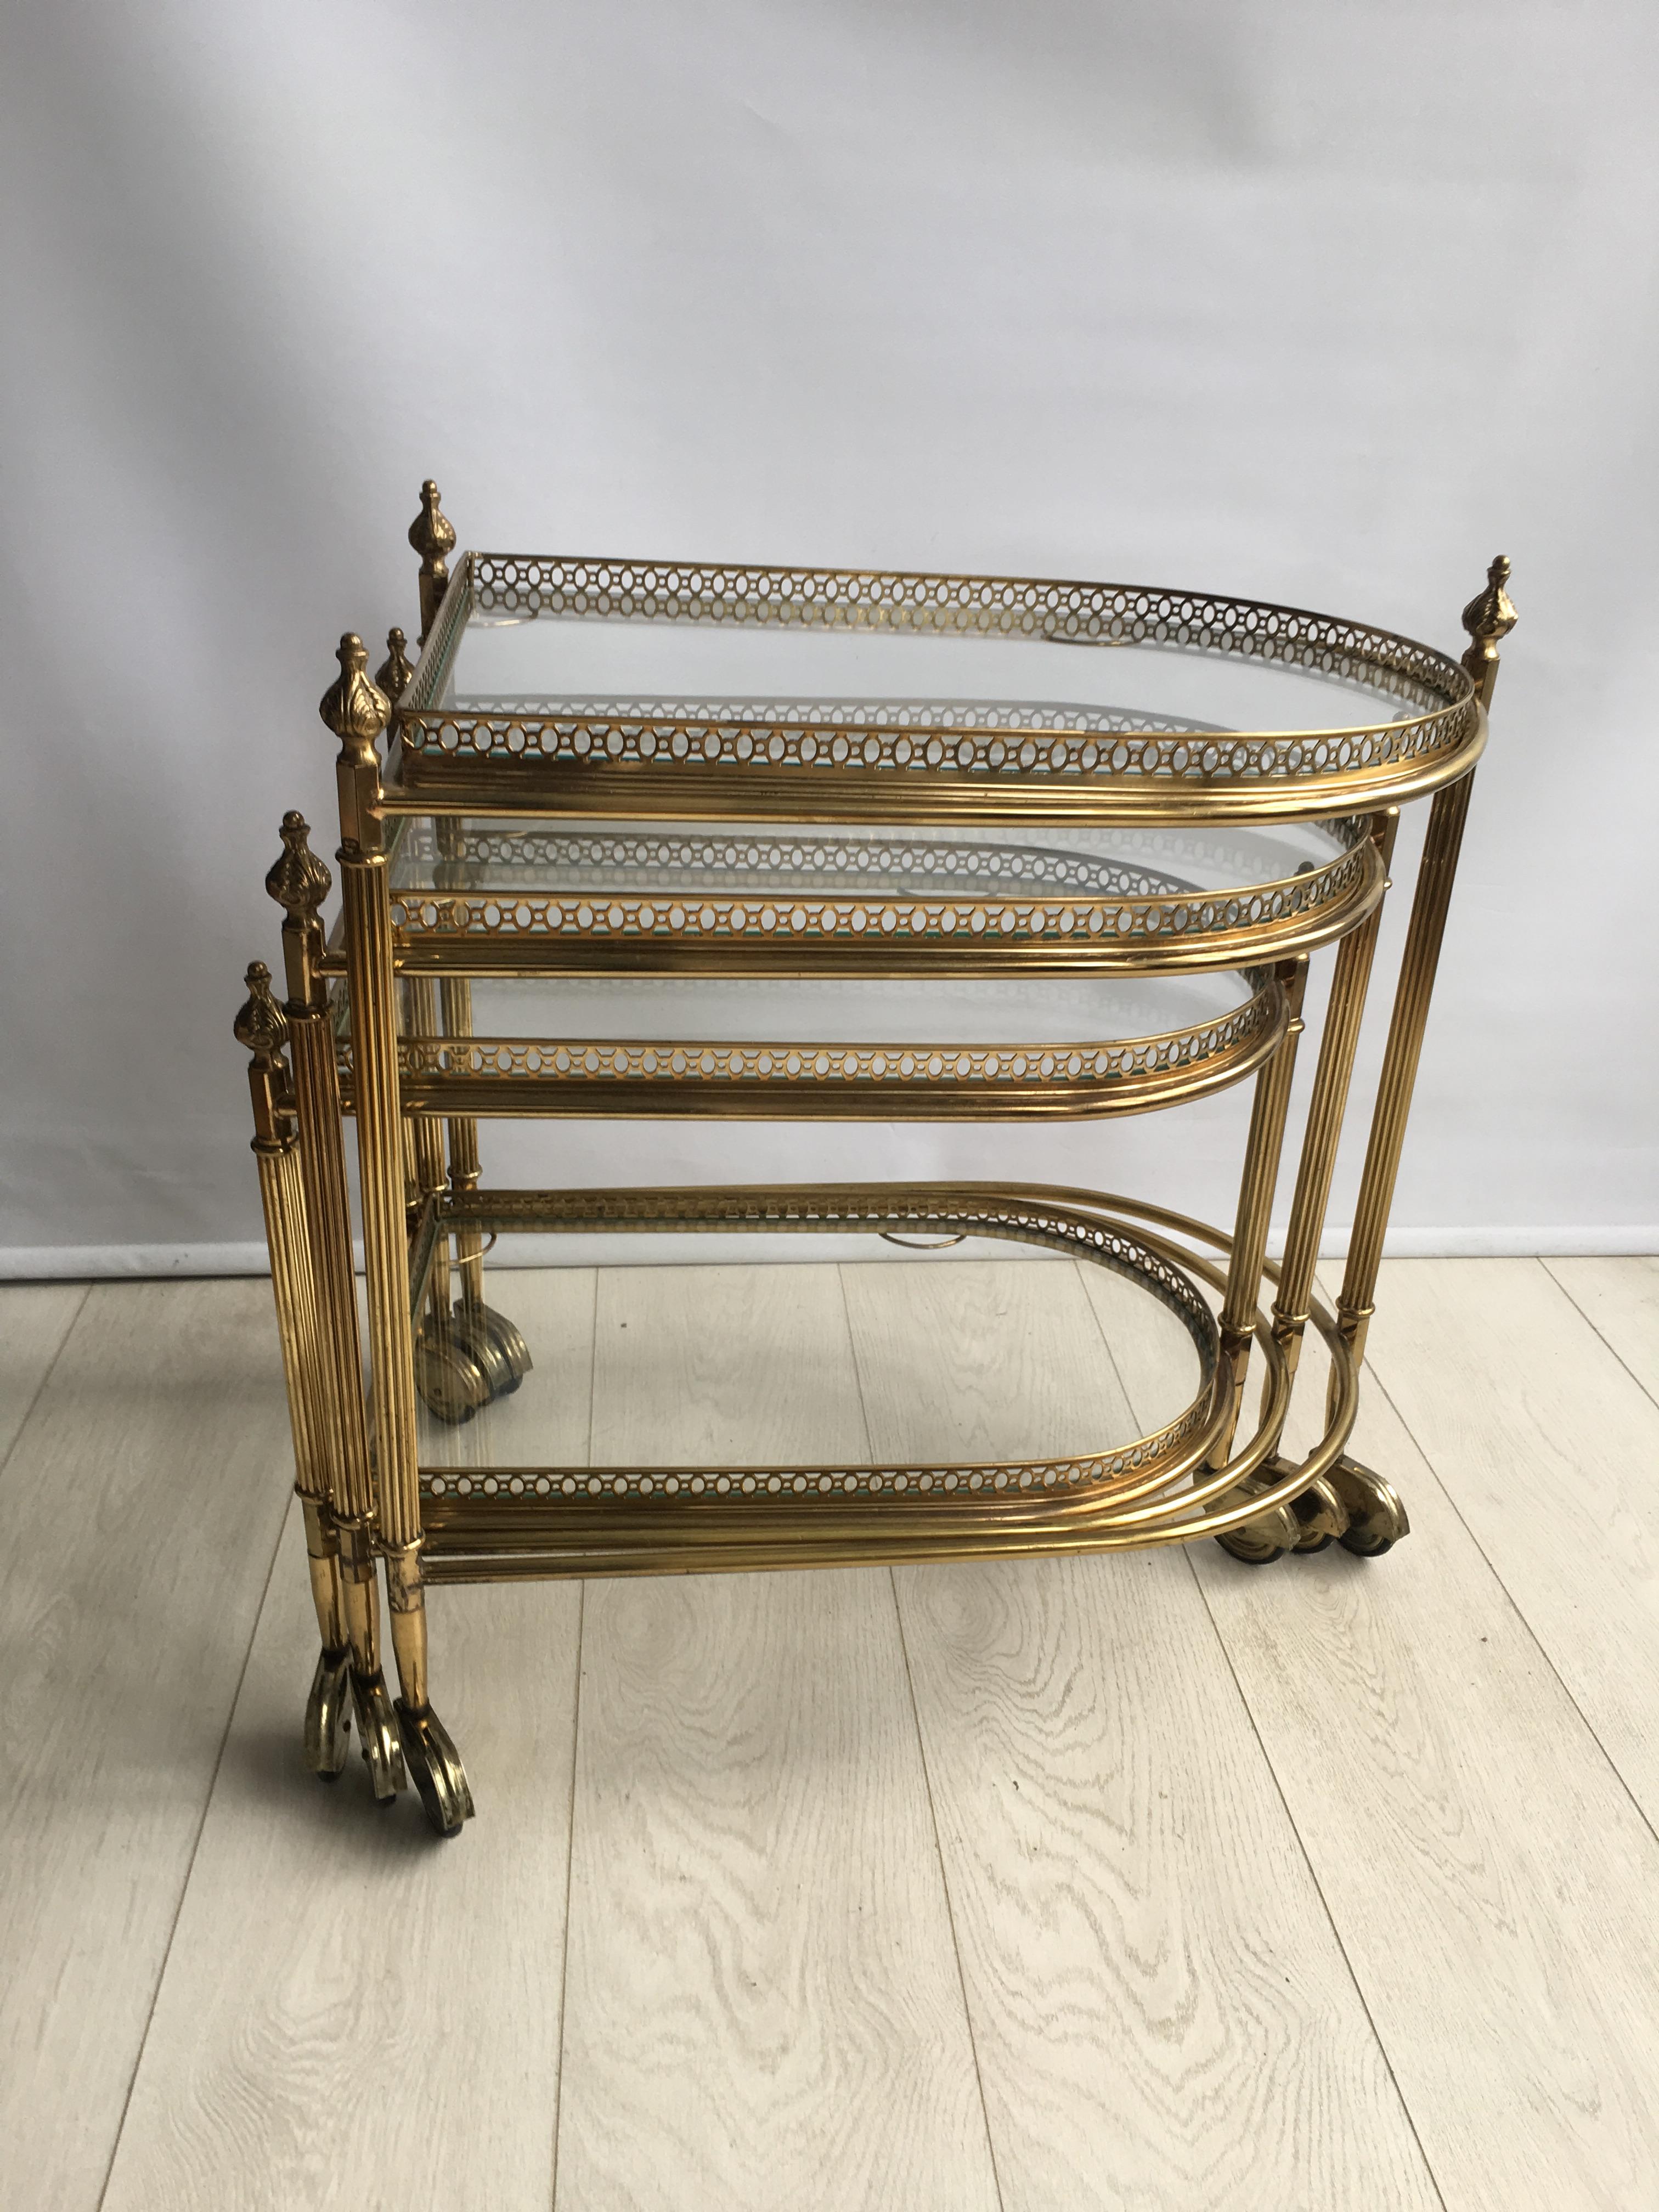 Attributed to Maison Bagués this set of 3 brass nesting tables/bar carts

Lacquered brass frames with a beautiful aged patina

On casters with removable trays,

circa 1950.

Largest table measures 58cm wide, 42cm deep and 62cm tall.